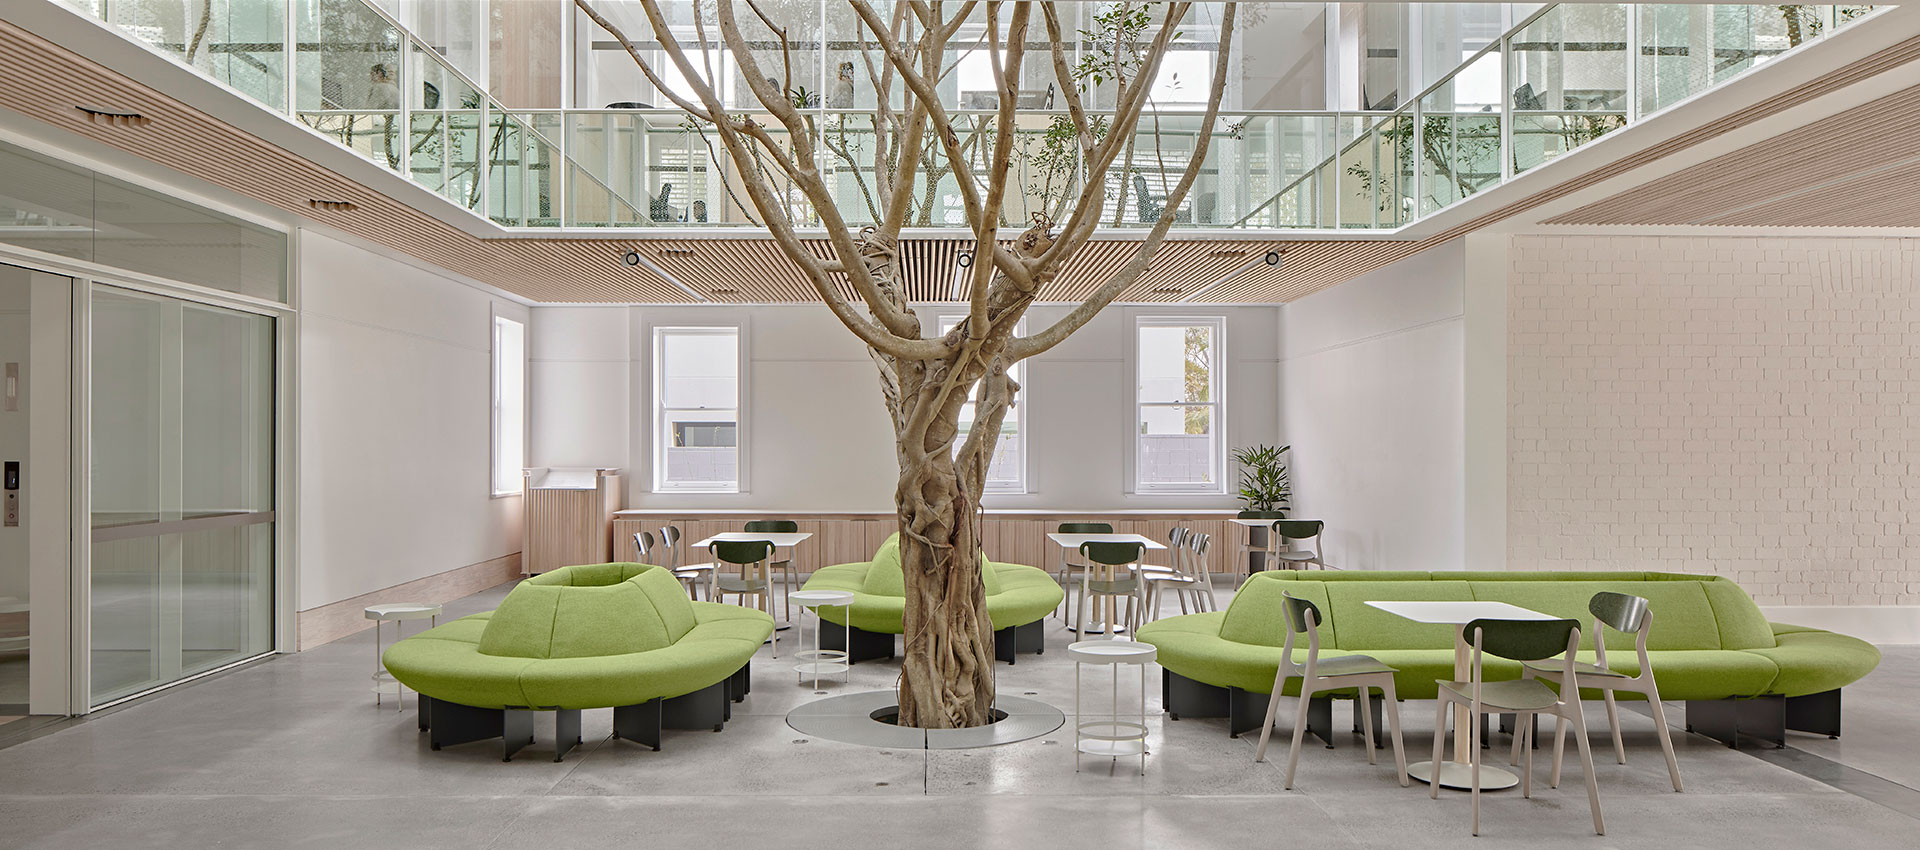 Buildcorp_Sustainability_Tree_in_Room_1920x850